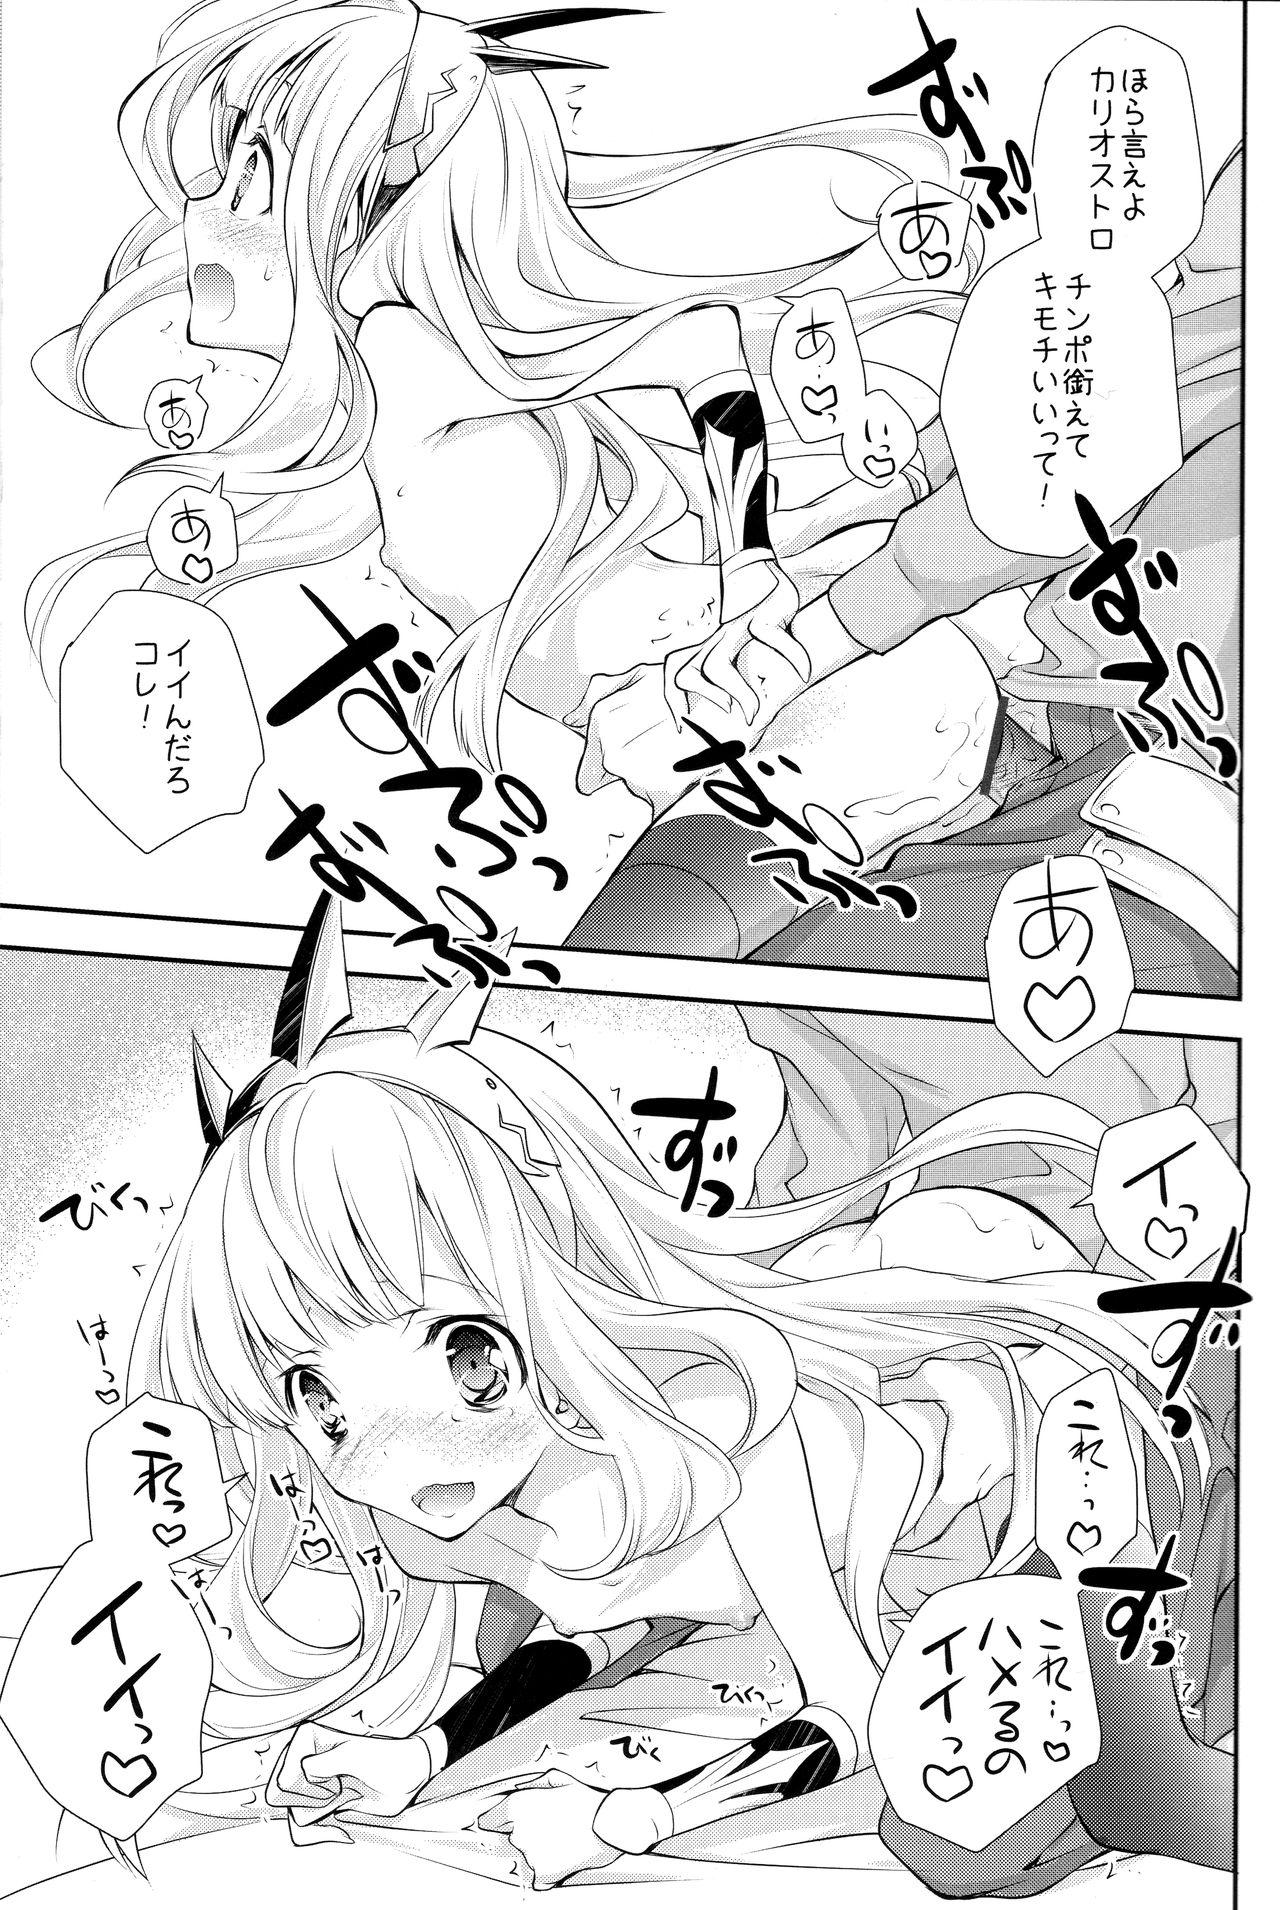 Stretching GB-BREAKOUT - Granblue fantasy Picked Up - Page 8